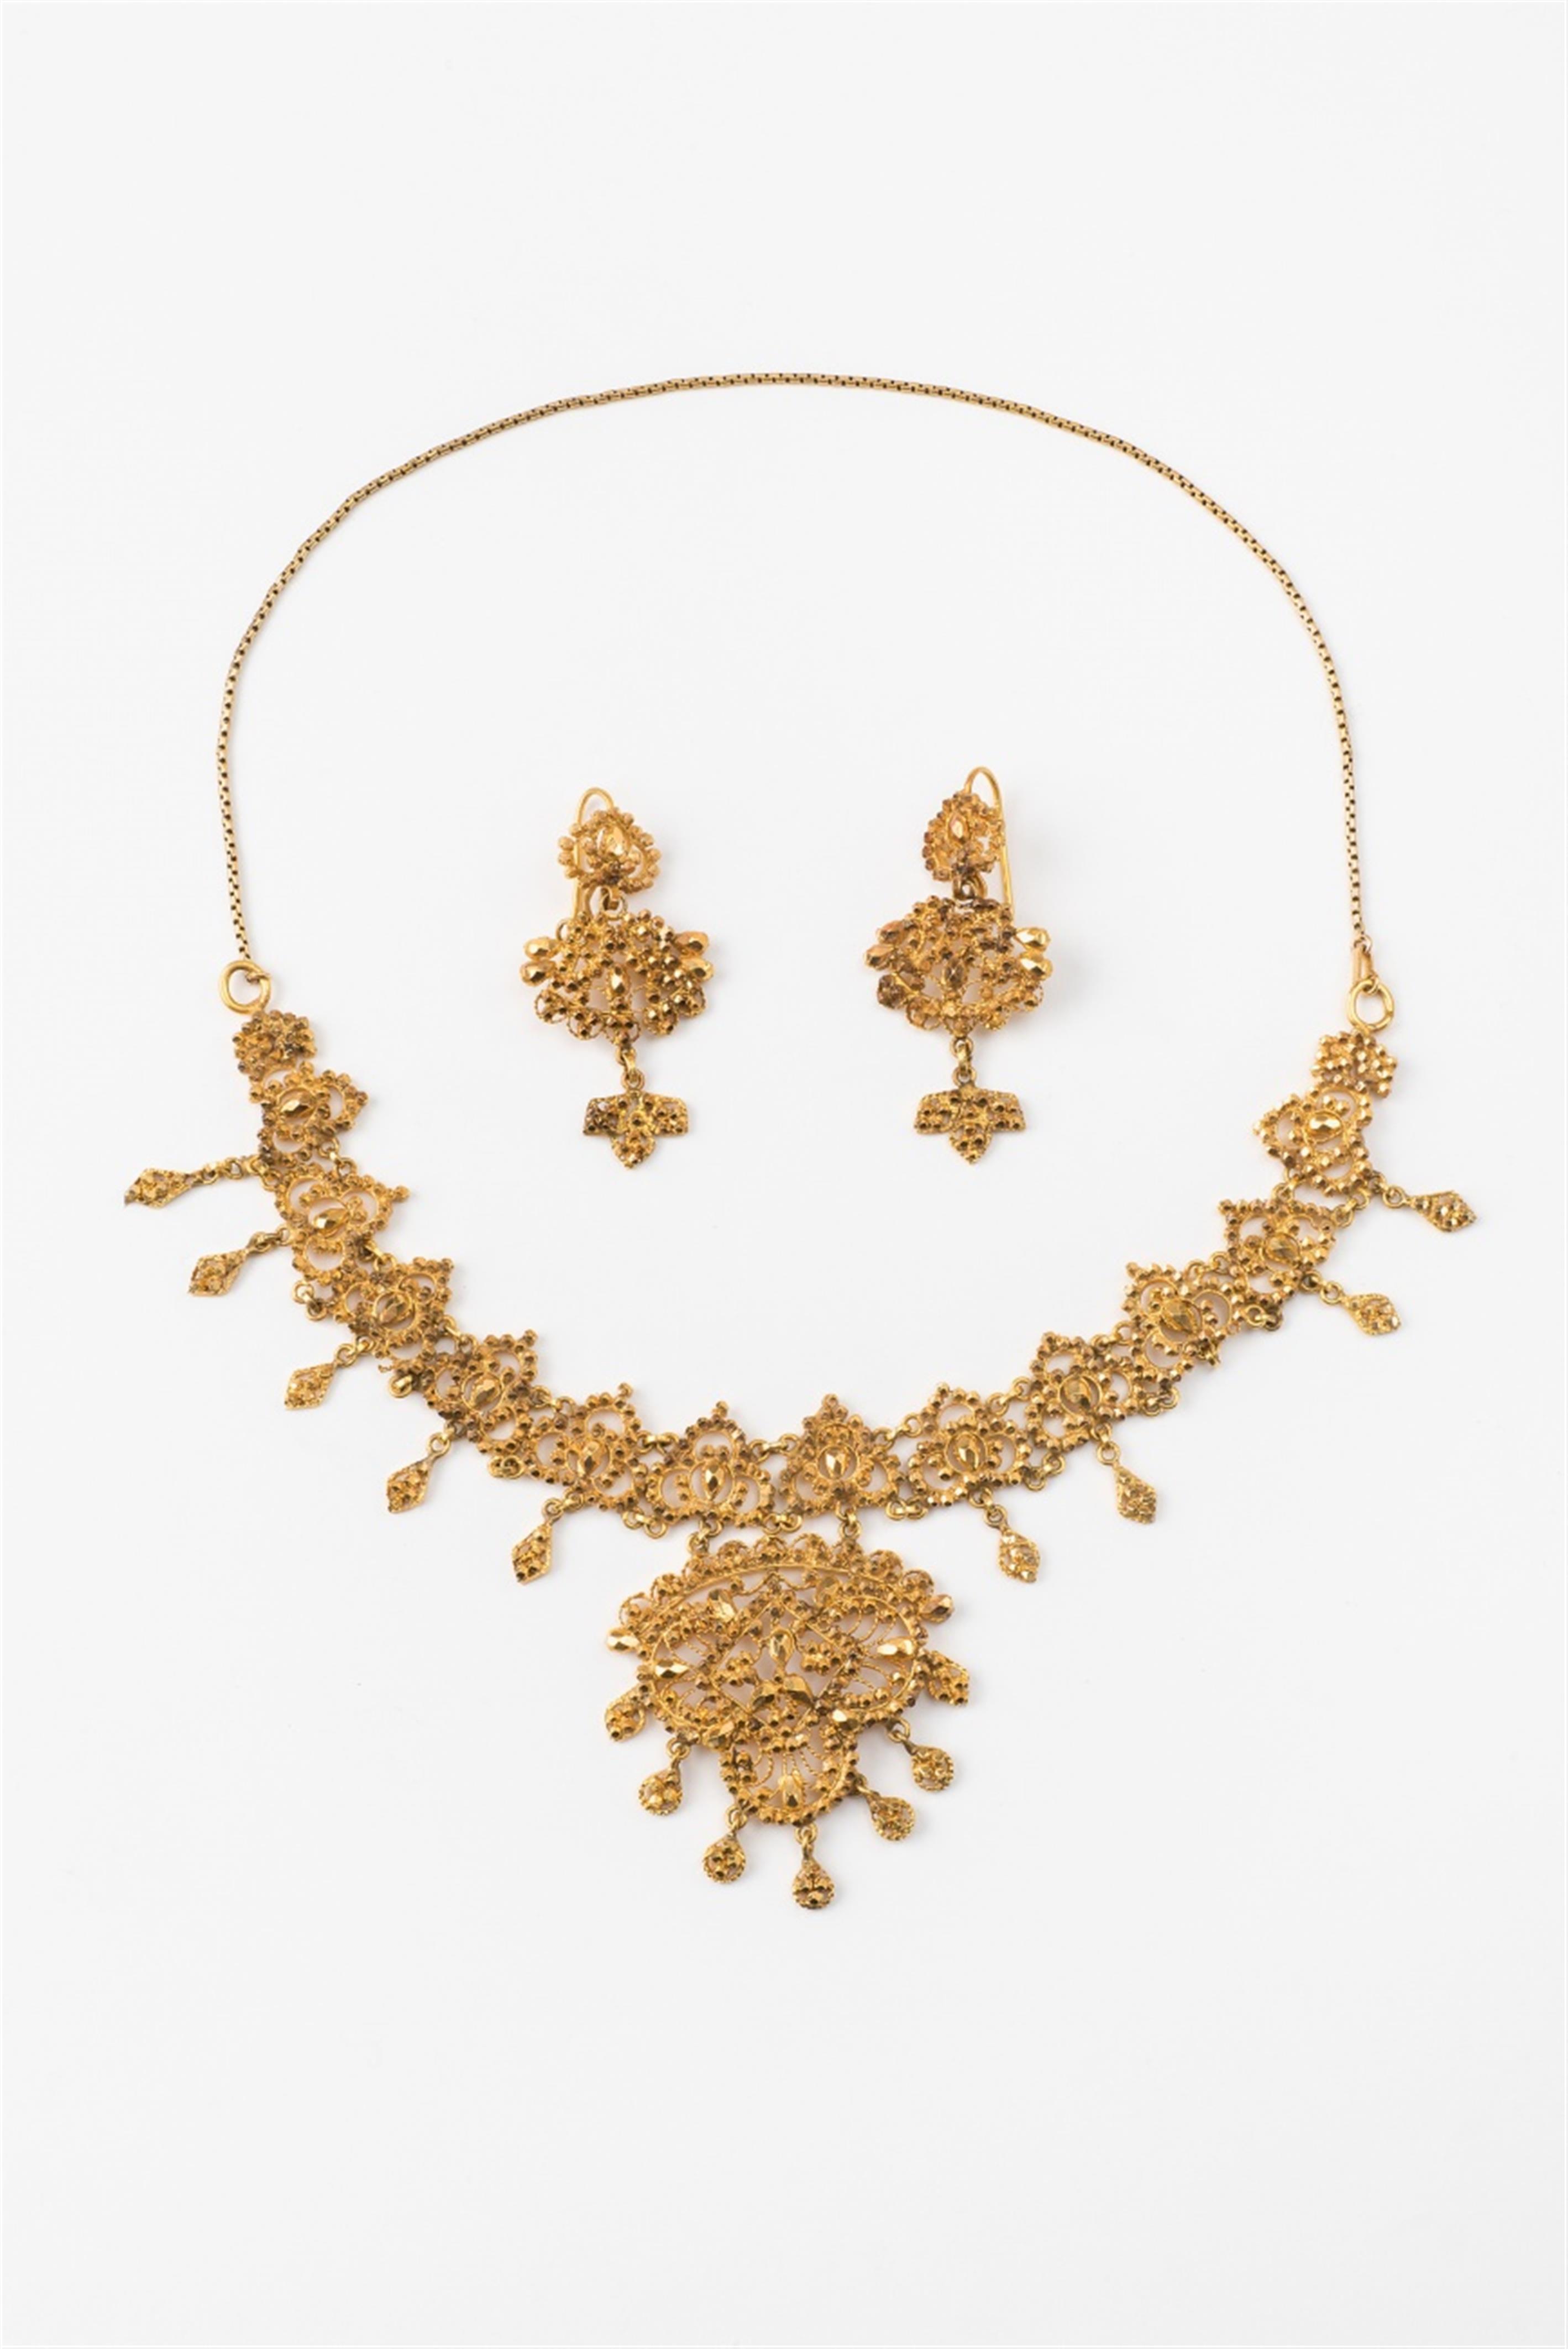 An Indian 22k gold fringe necklace and earrings - image-1